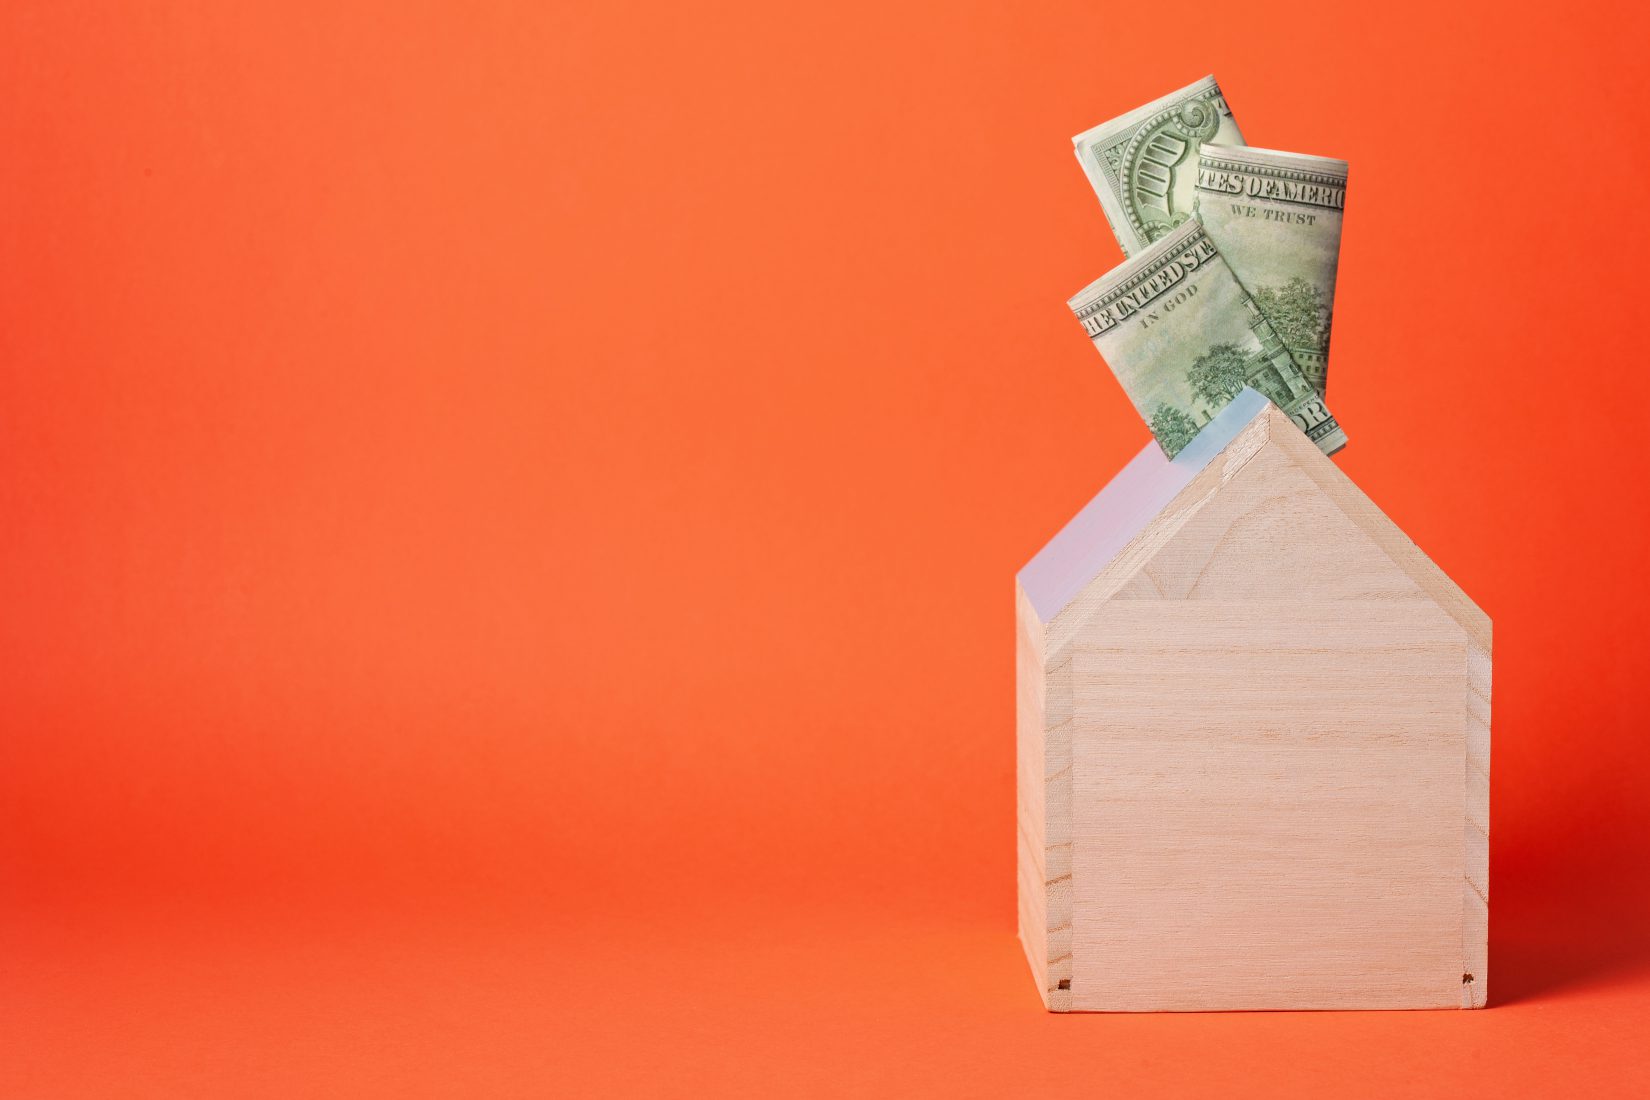 Wooden toy house with money sticking out of the top, set against an orange background